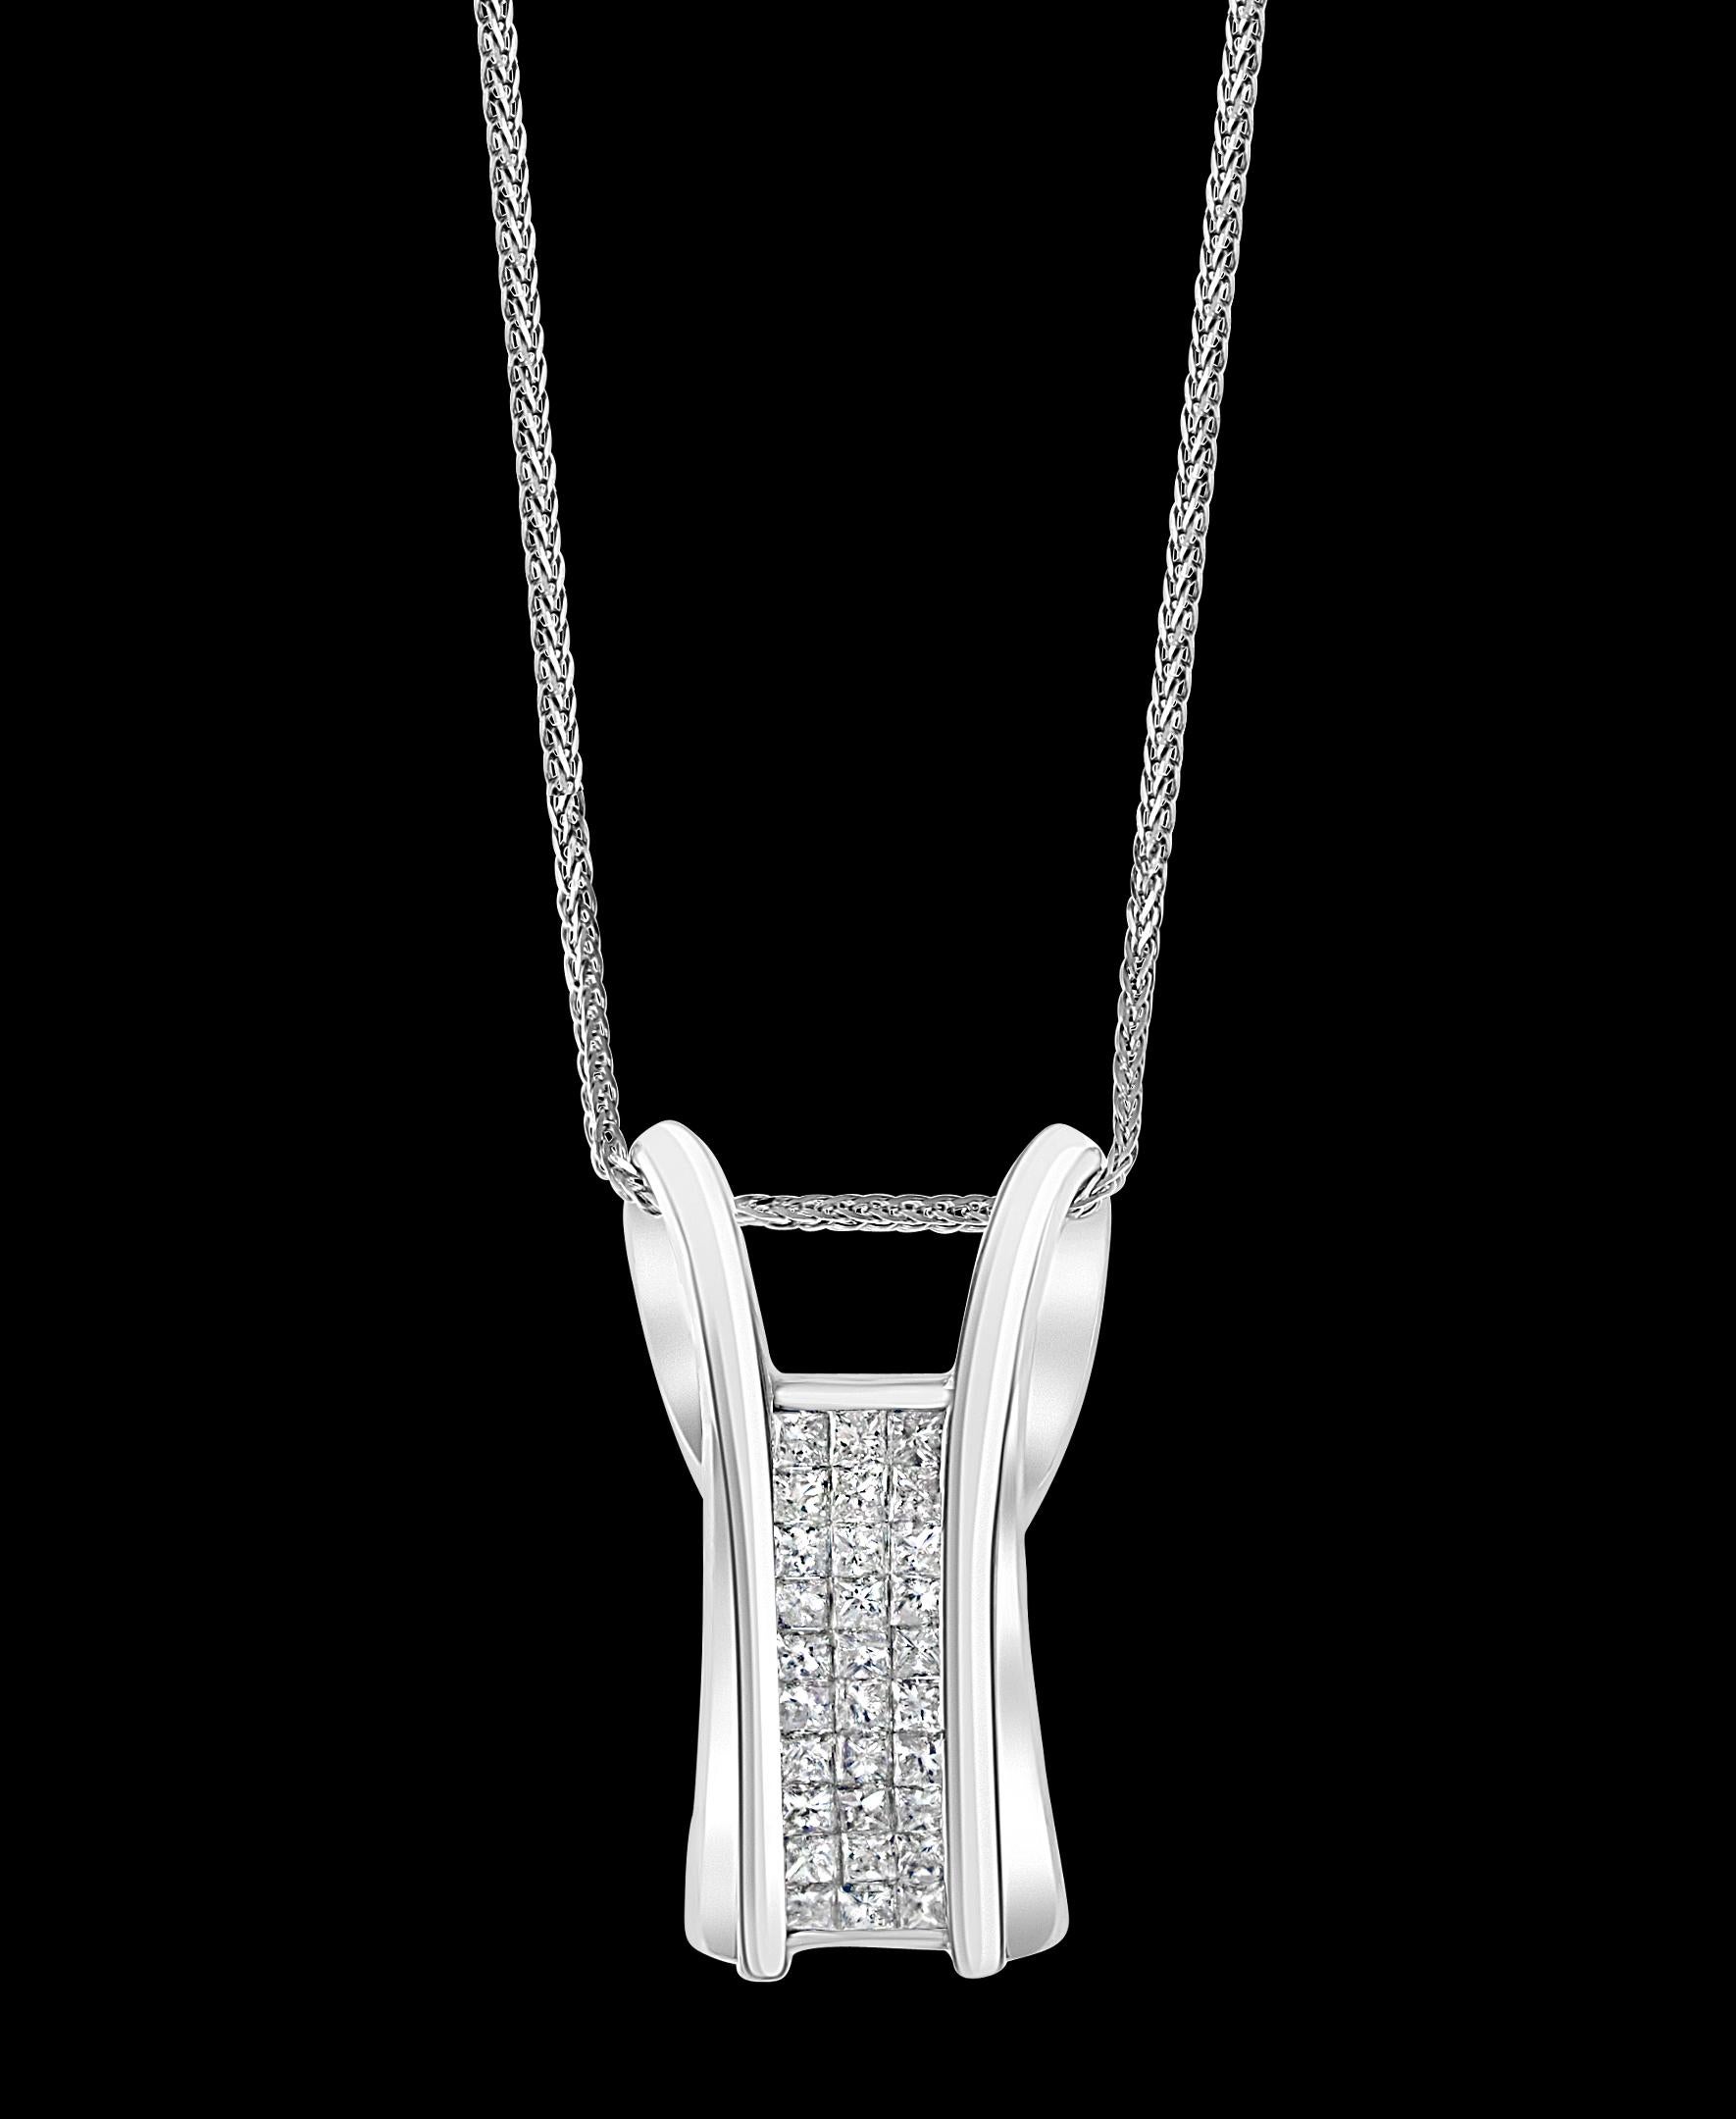 2.2 Carat Princess Cut Diamond Pendant/ Necklace 14 Karat White Gold with Chain In Excellent Condition In New York, NY